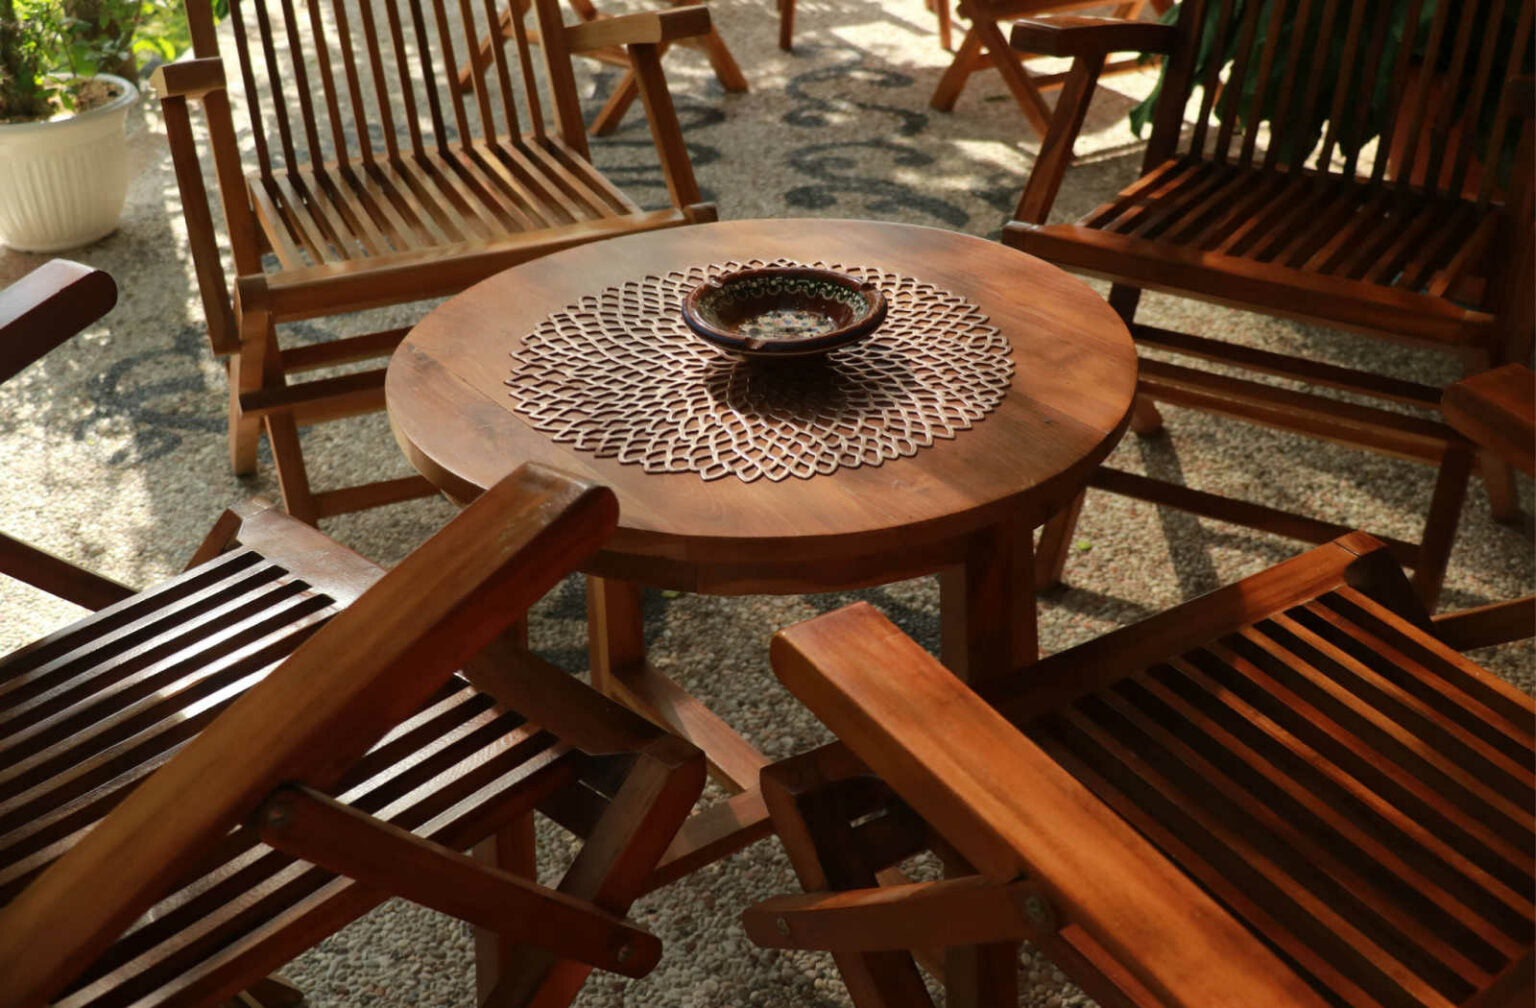 Four wood chairs around a wood table on a patio